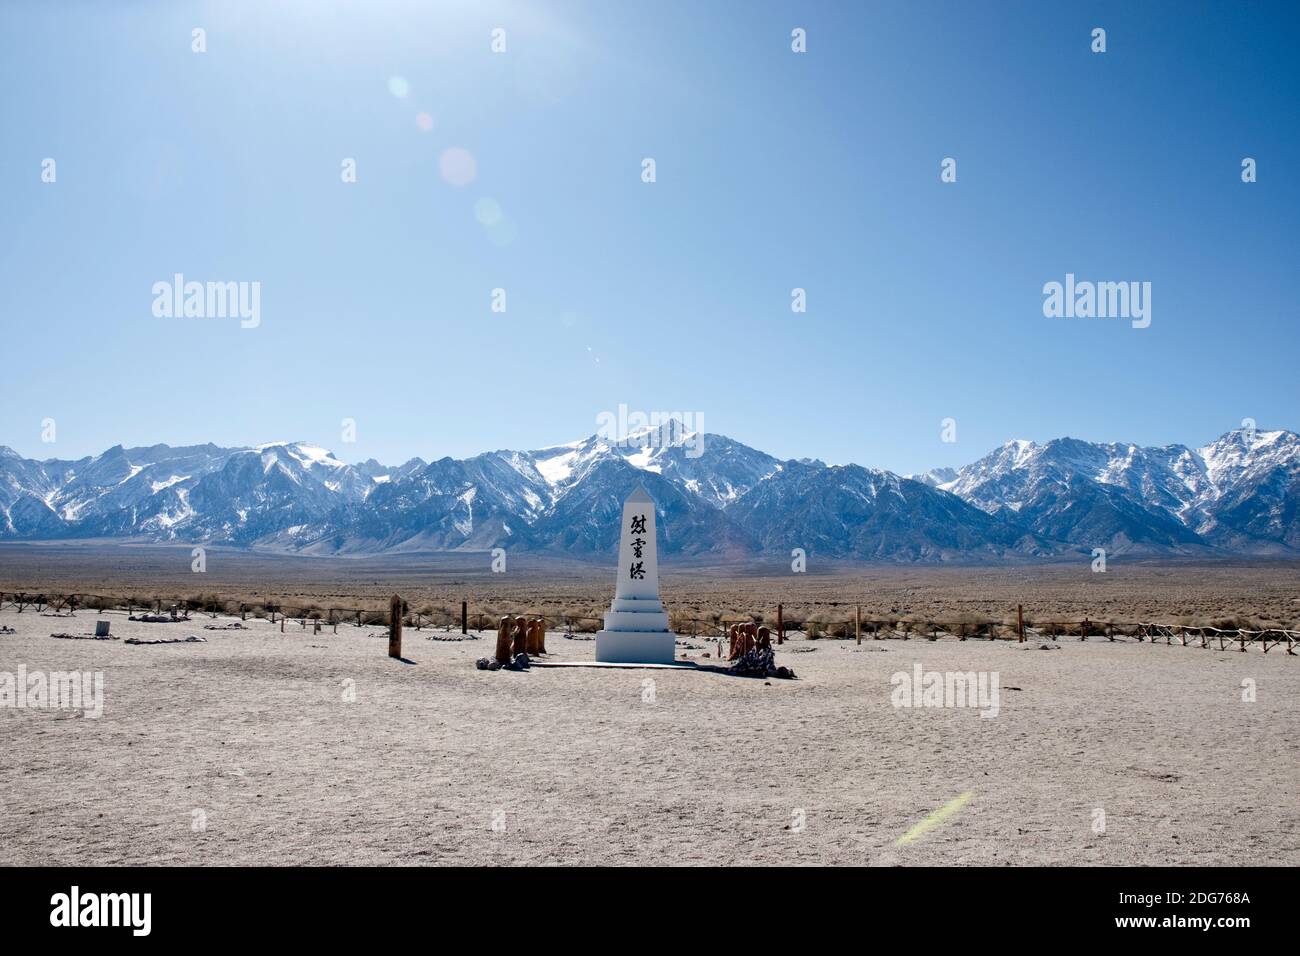 Cemetery Monument at Manzanar Nat. Historic Site, an internment camp where Japanese Americans were imprisoned during World War Two ,California, USA. Stock Photo